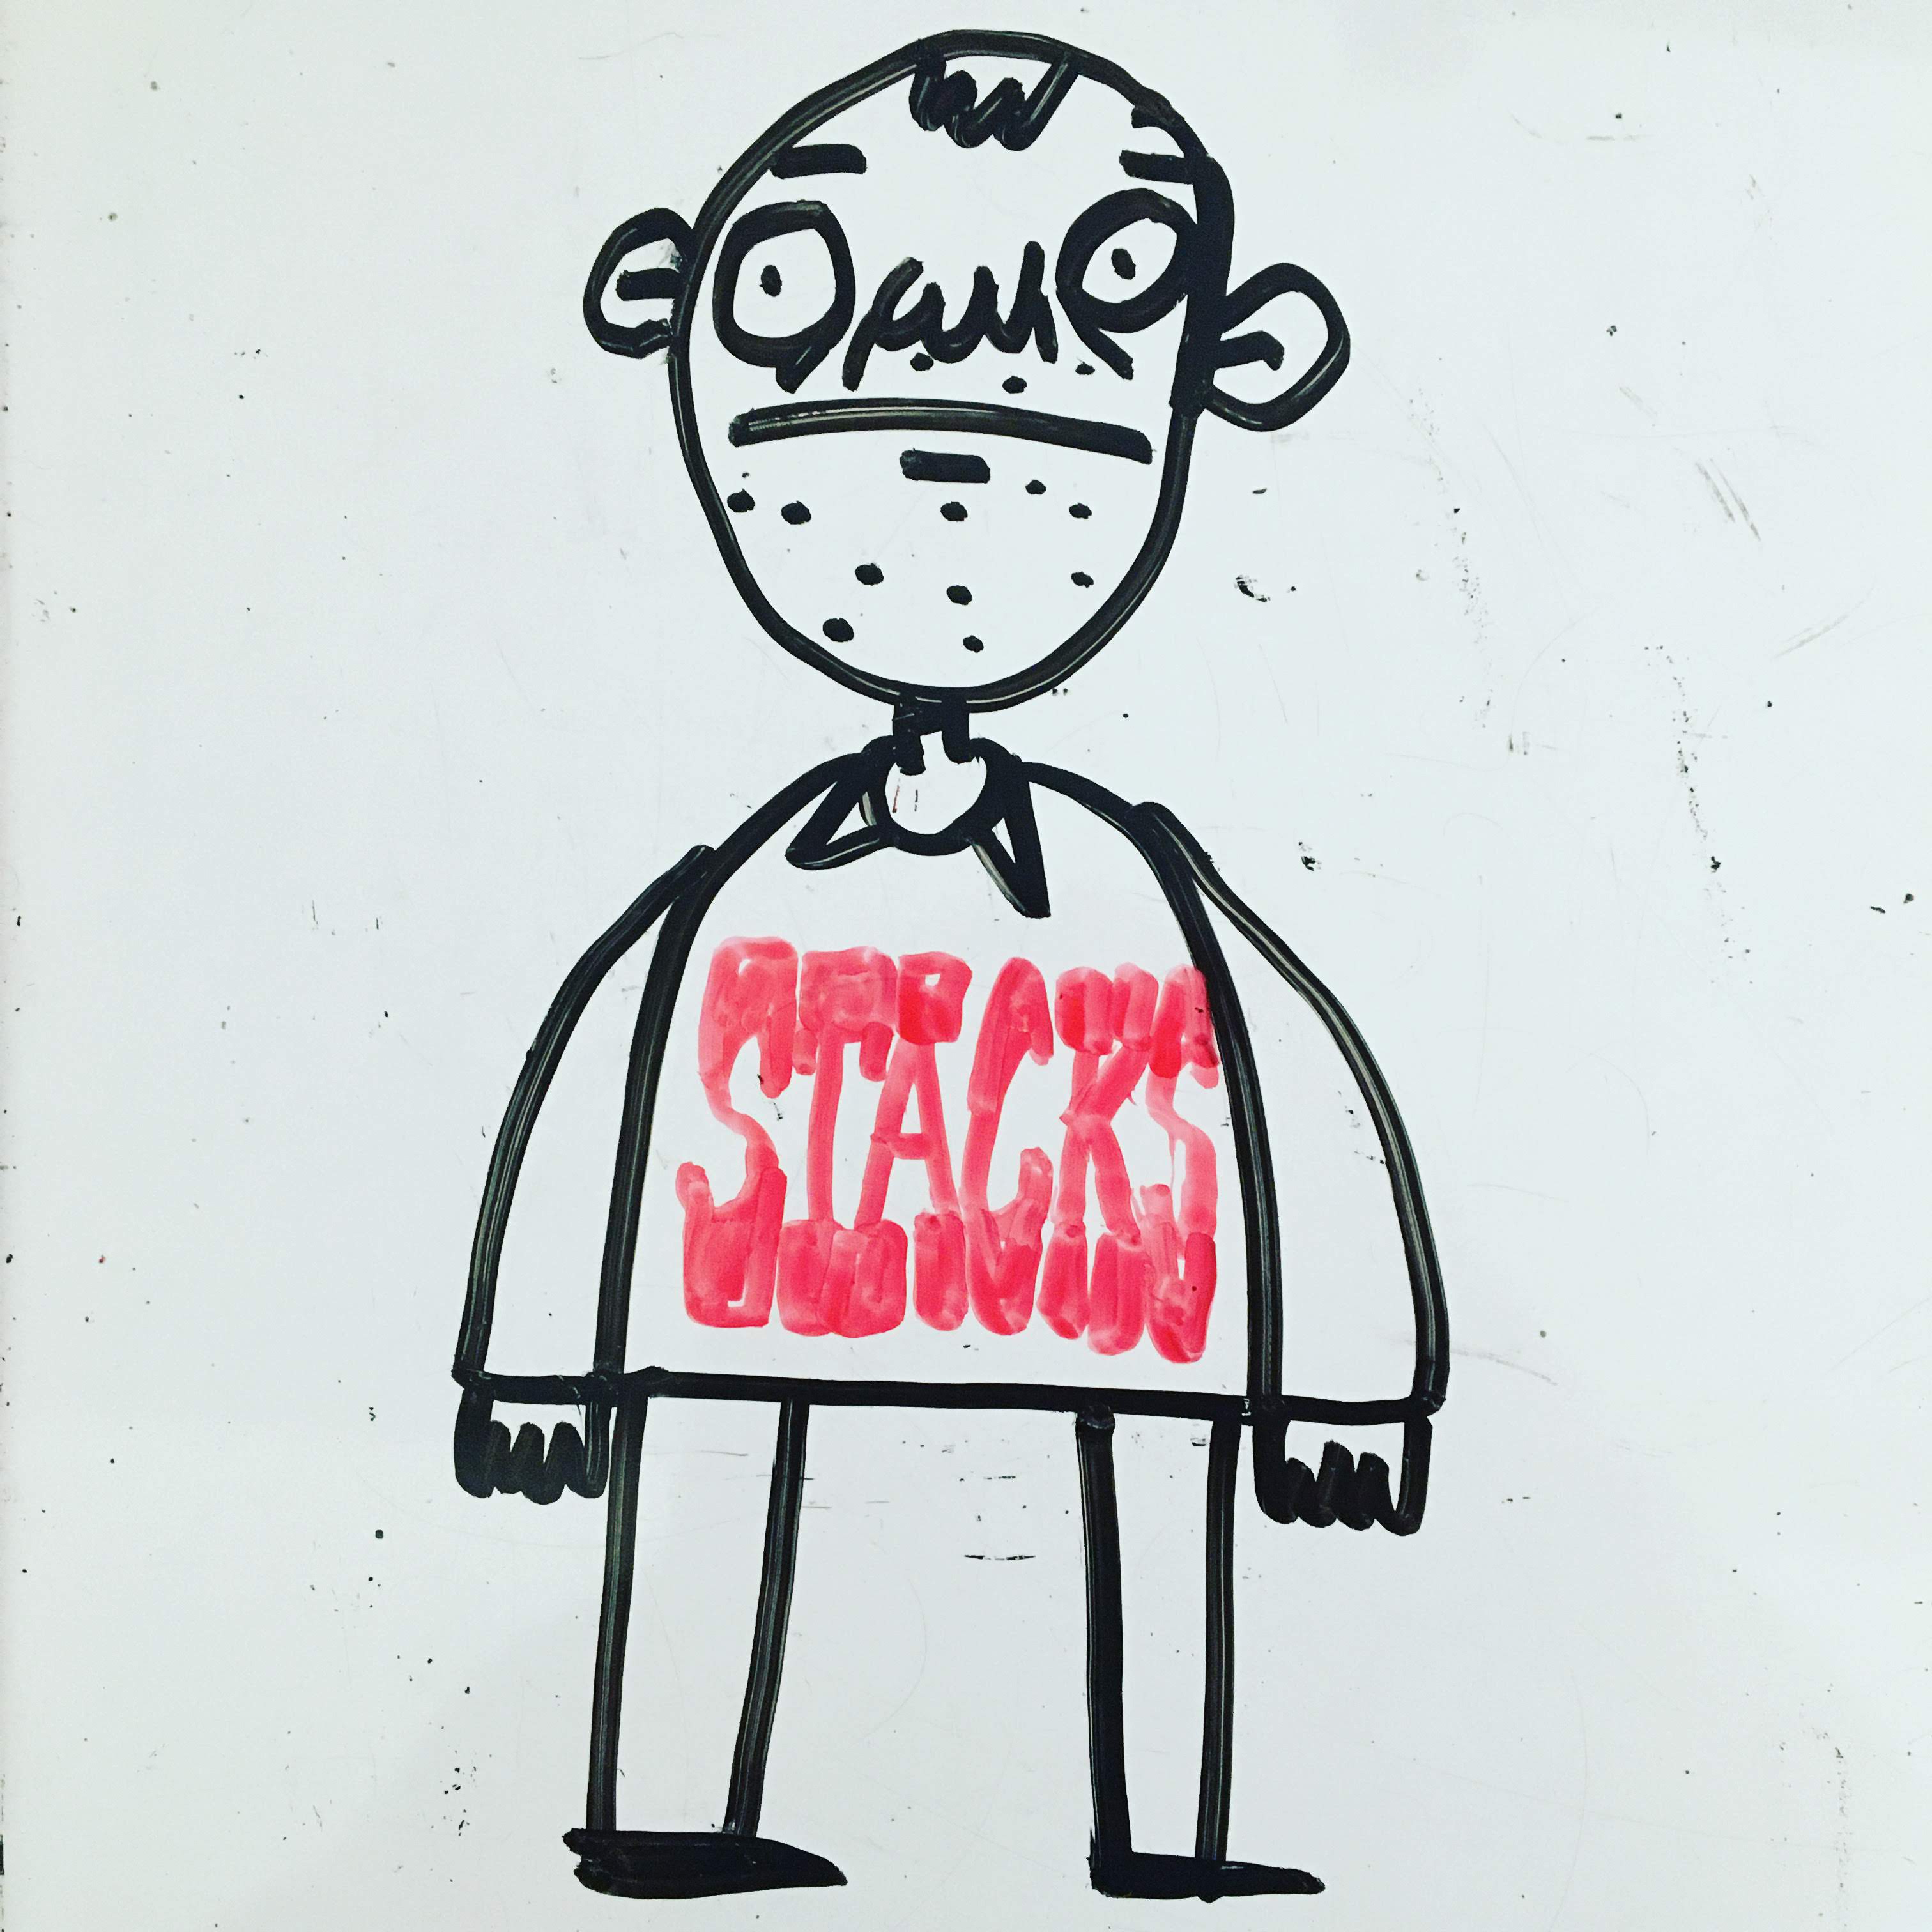 Whiteboard drawing of a guy in a Stacks t-shirt.